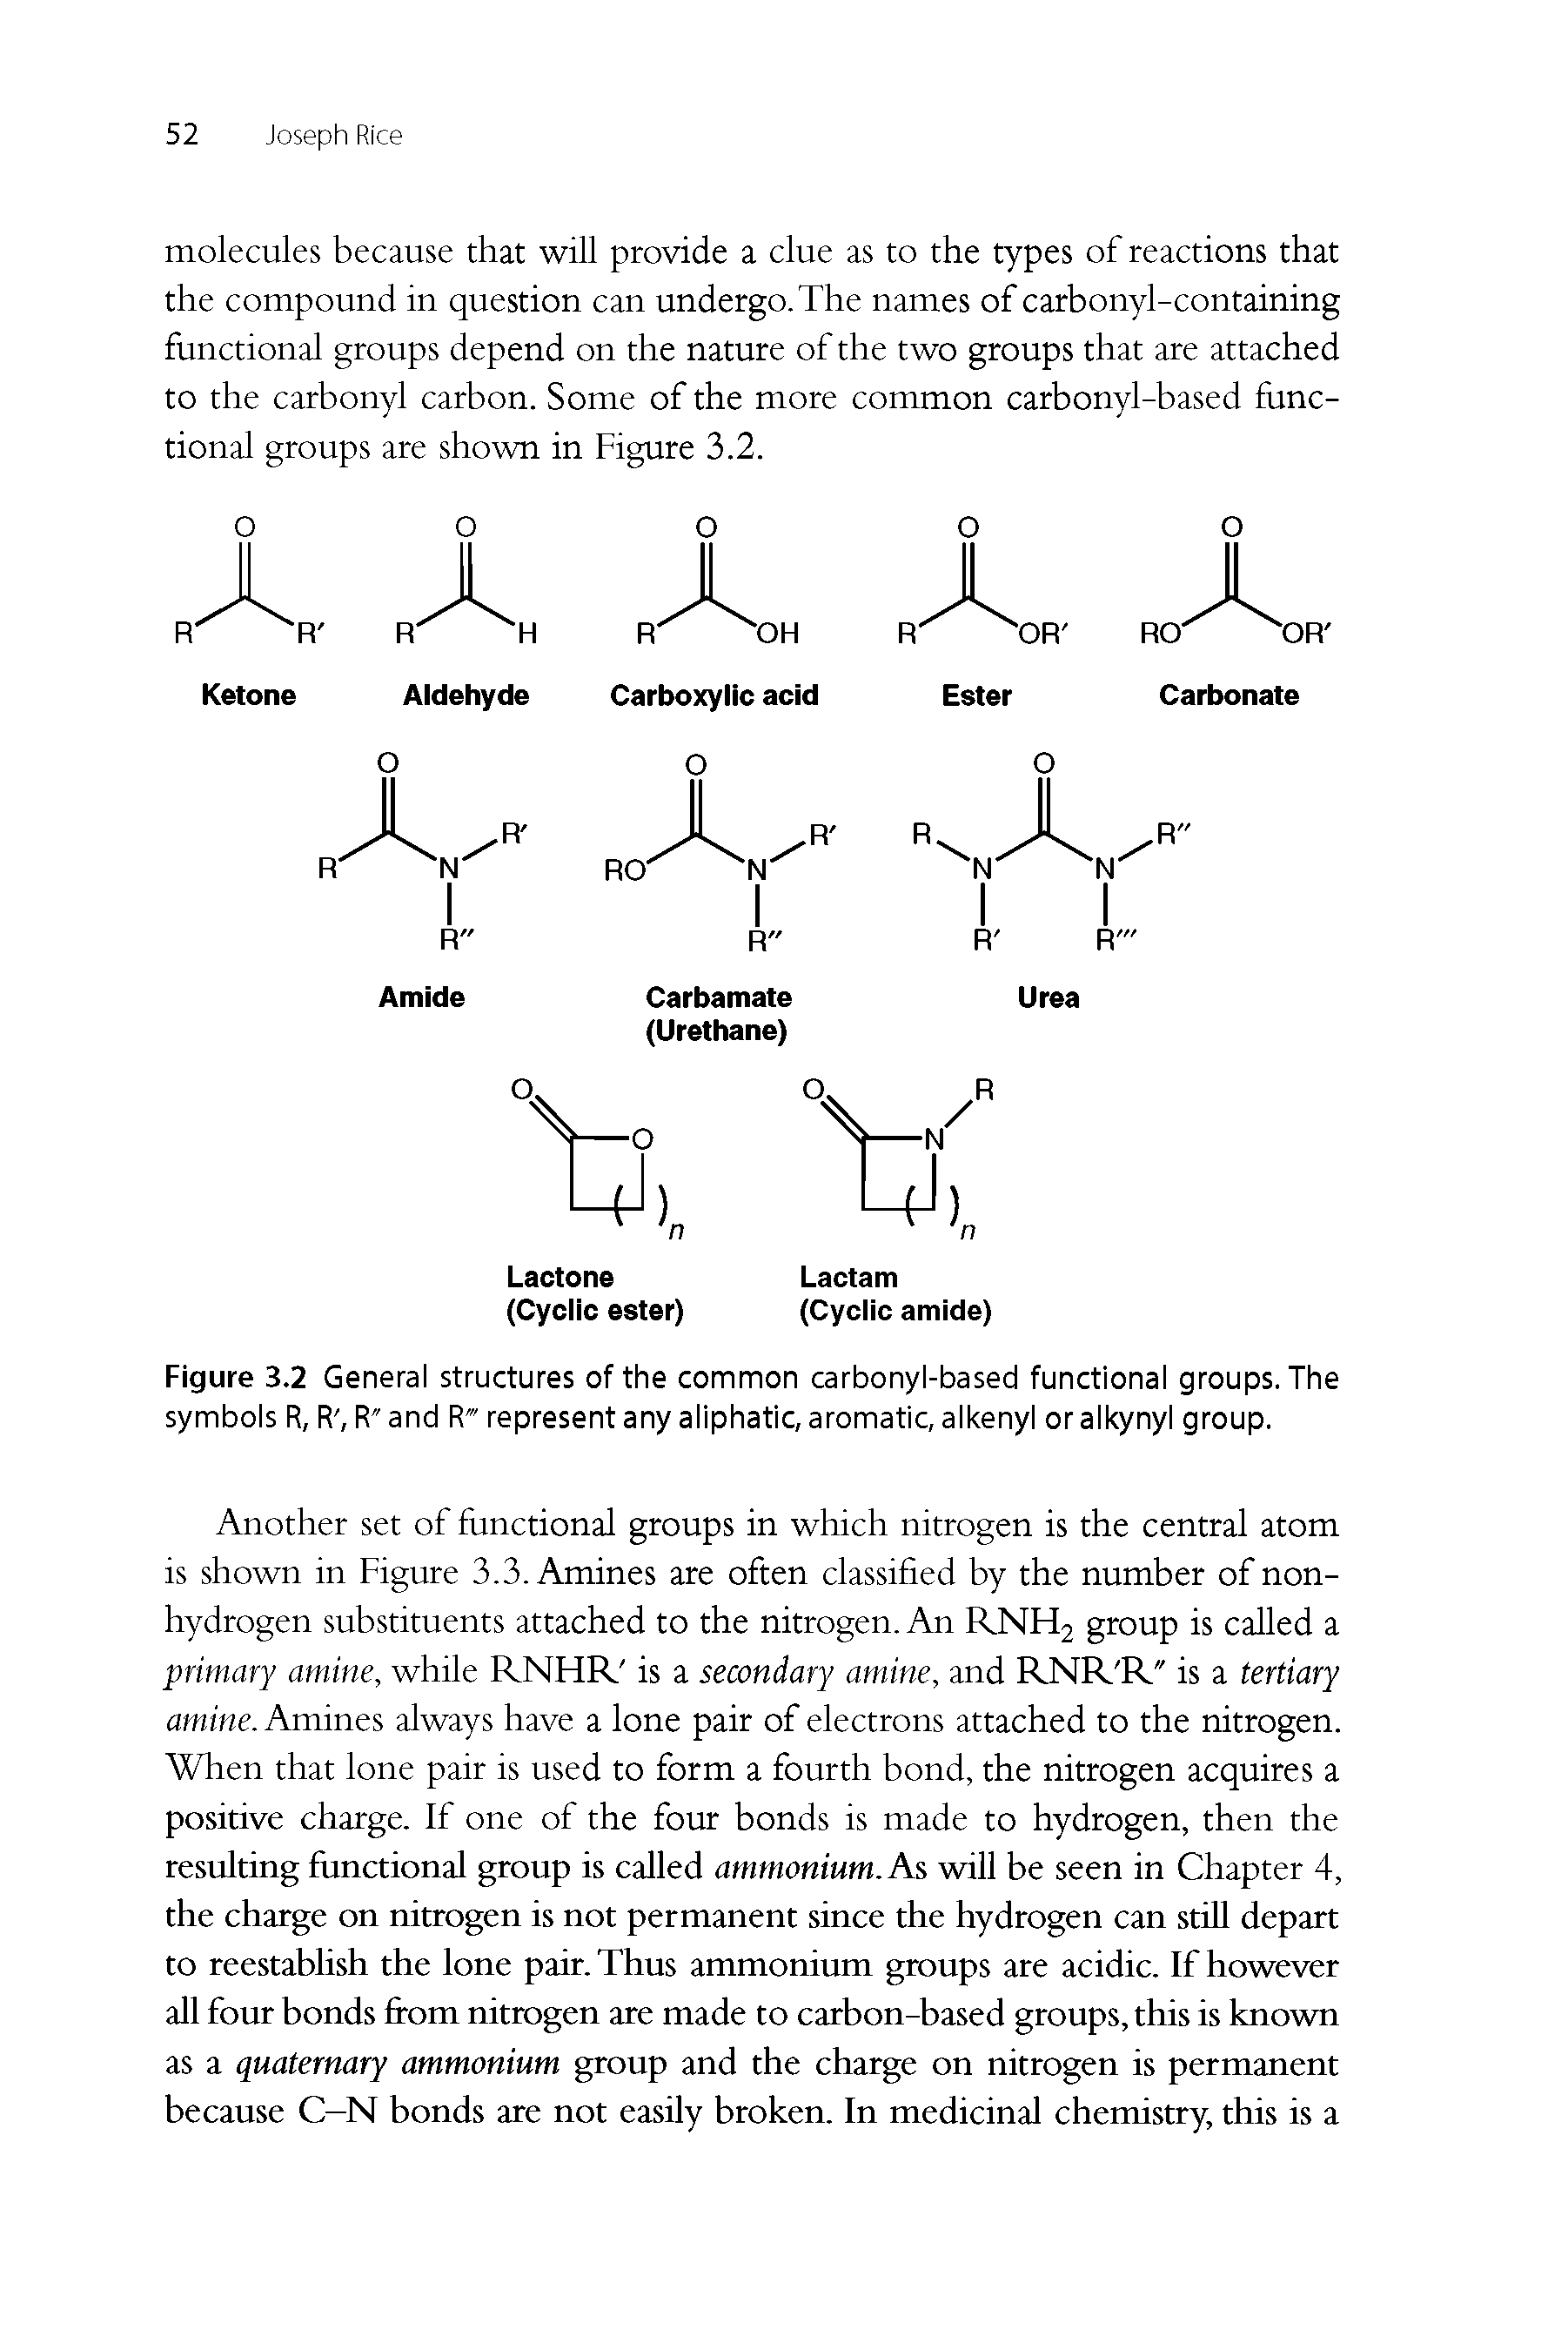 Figure 3.2 General structures of the common carbonyl-based functional groups. The symbols R, R, R" and R" represent any aliphatic, aromatic, alkenyl or alkynyl group.